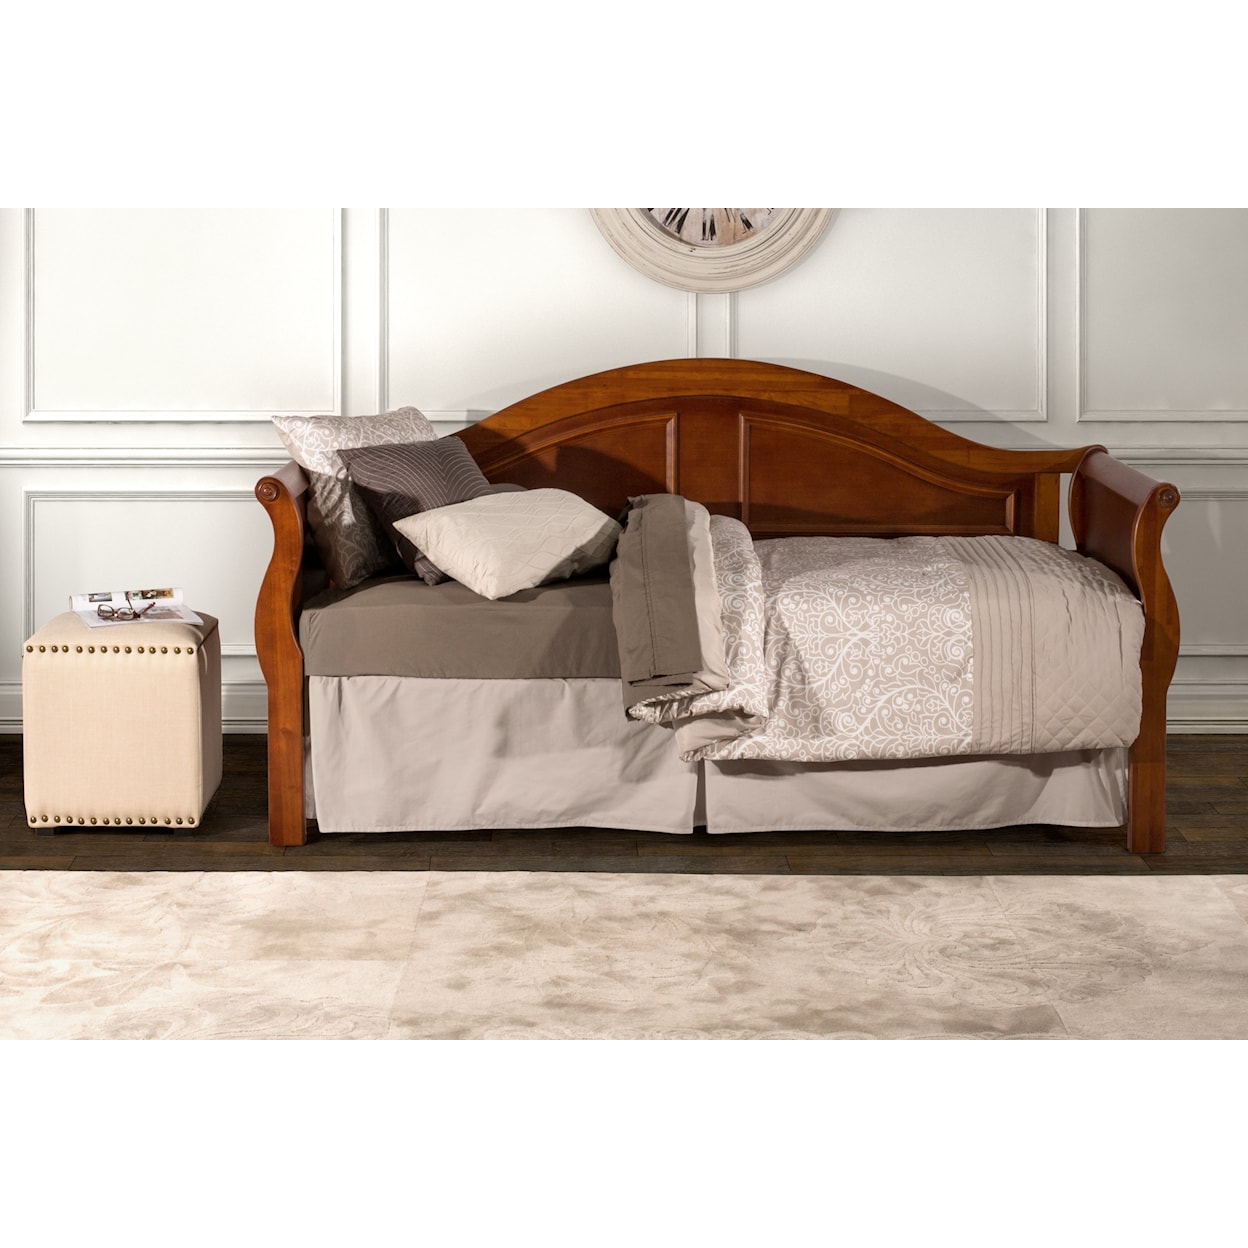 Hillsdale Bedford Twin Daybed